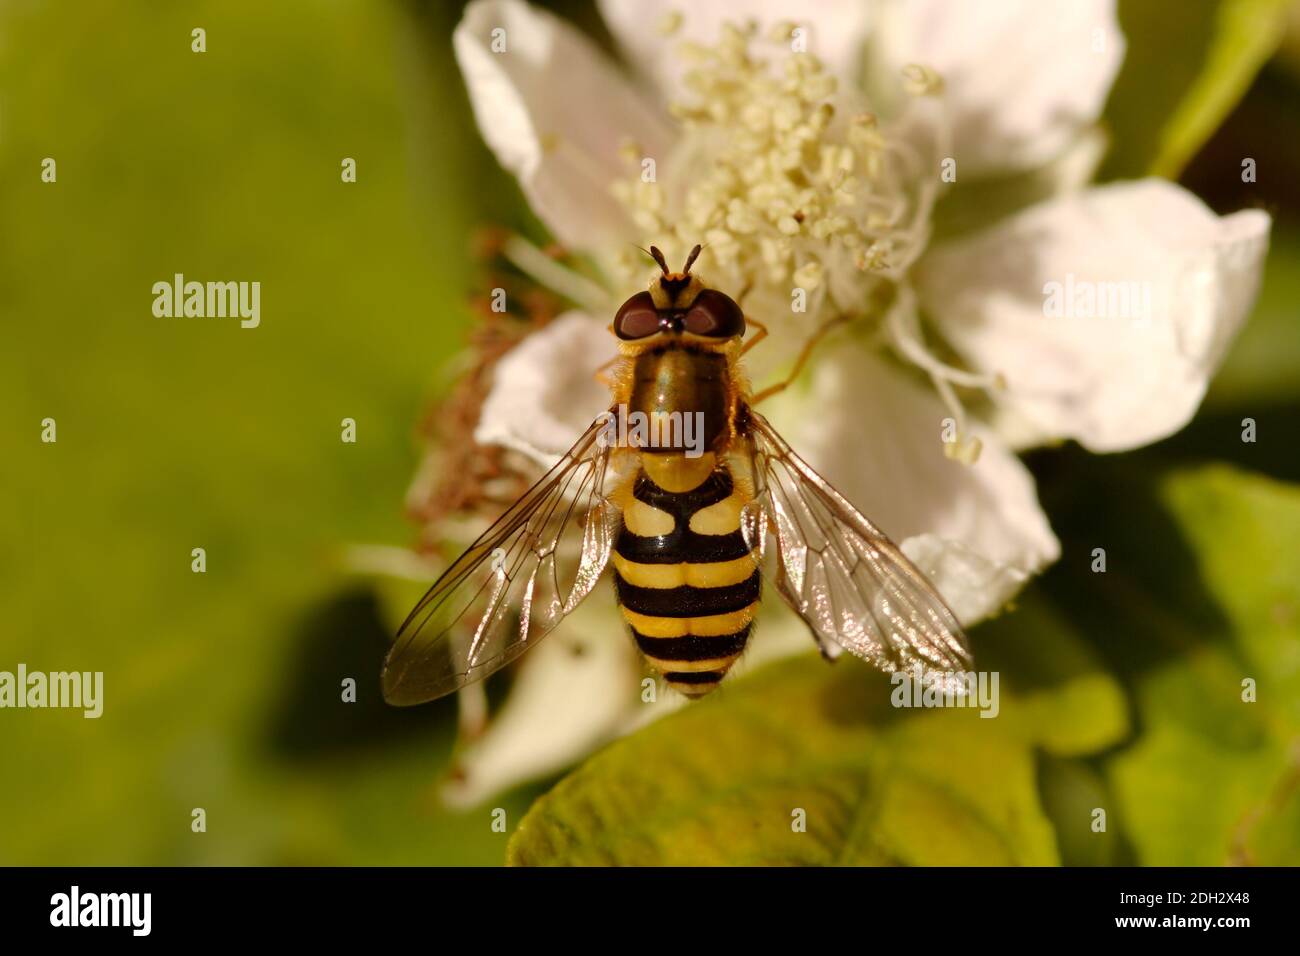 Close up of Hover fly , also known as Syrphid fly on Flower blossom Stock Photo